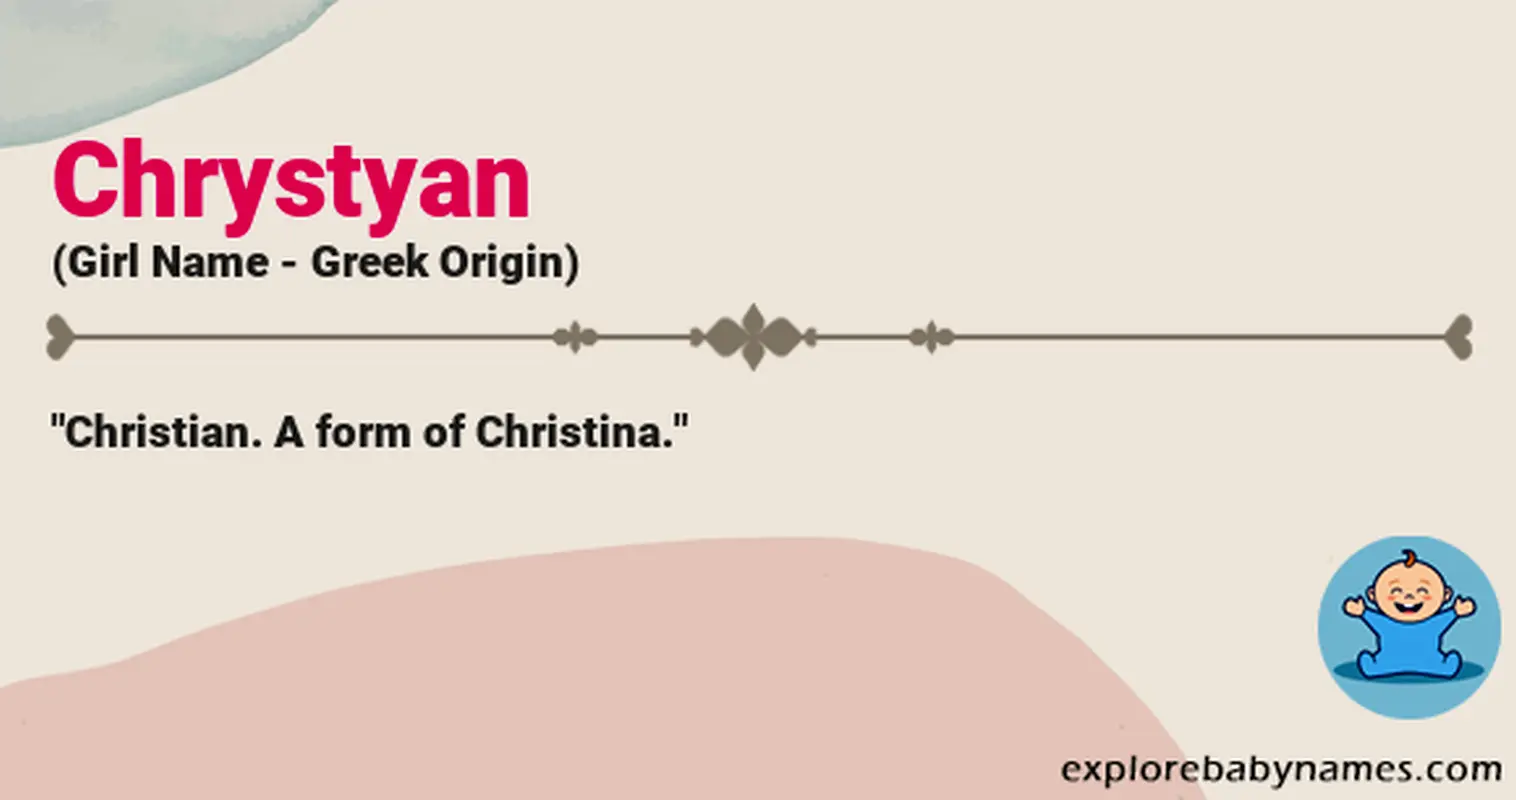 Meaning of Chrystyan